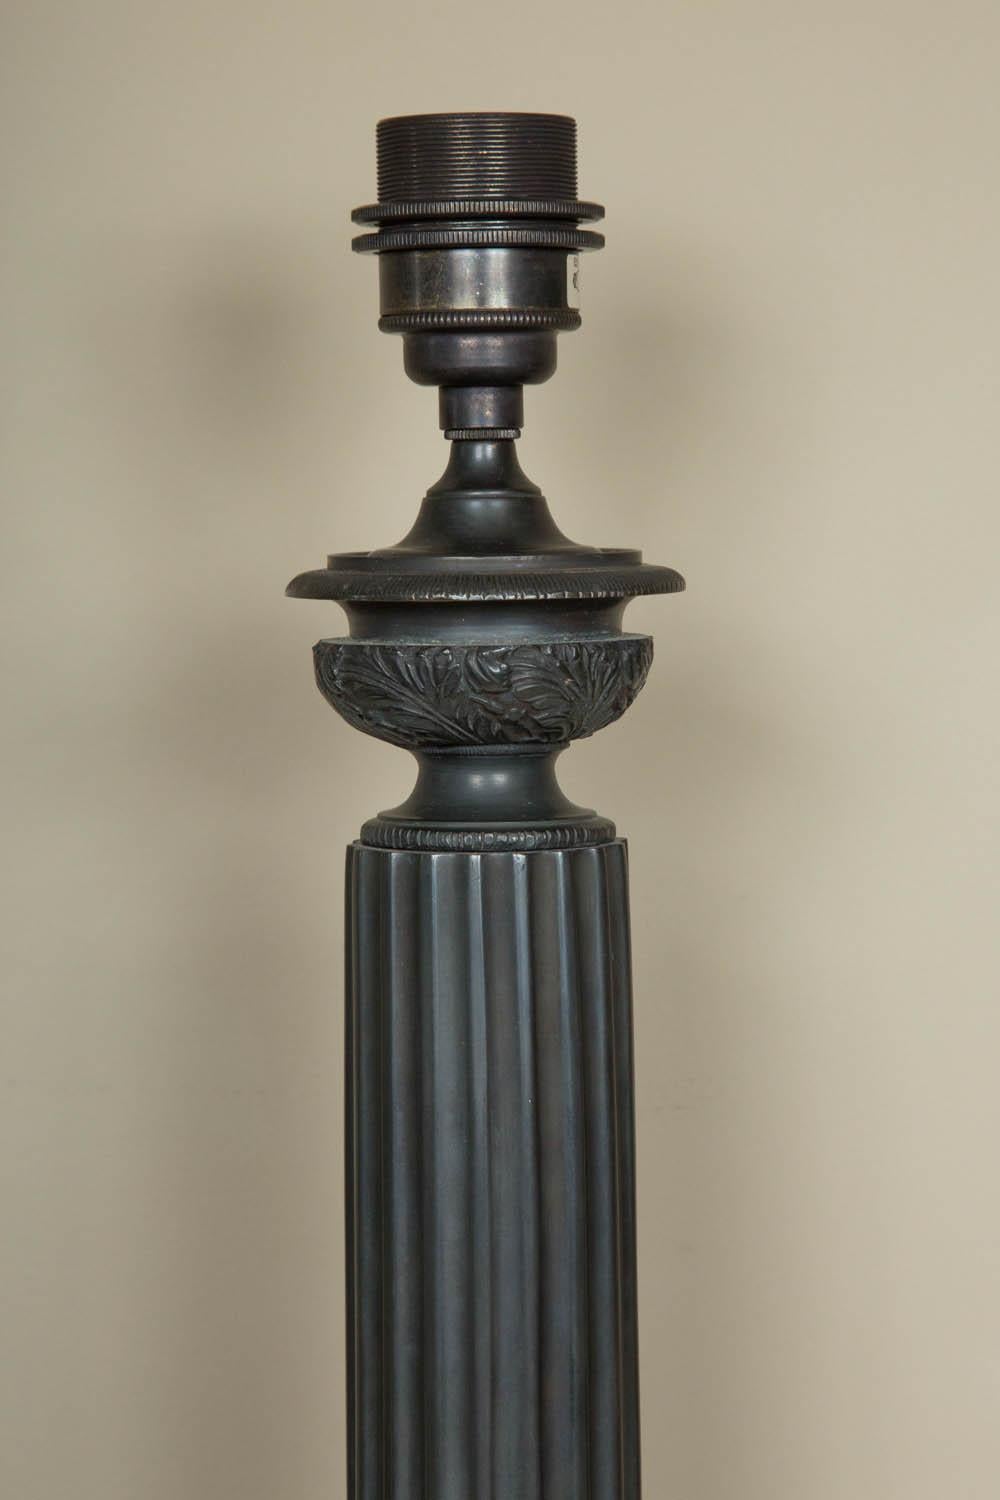 A tall lamp base in the shape of a classical column of recent manufacture, finely chased and casted to a very high, crisp definition.
Superb quality and heavy patinated bronze
Empire style
Measures: Height 65 cm
Please note: Only one available.